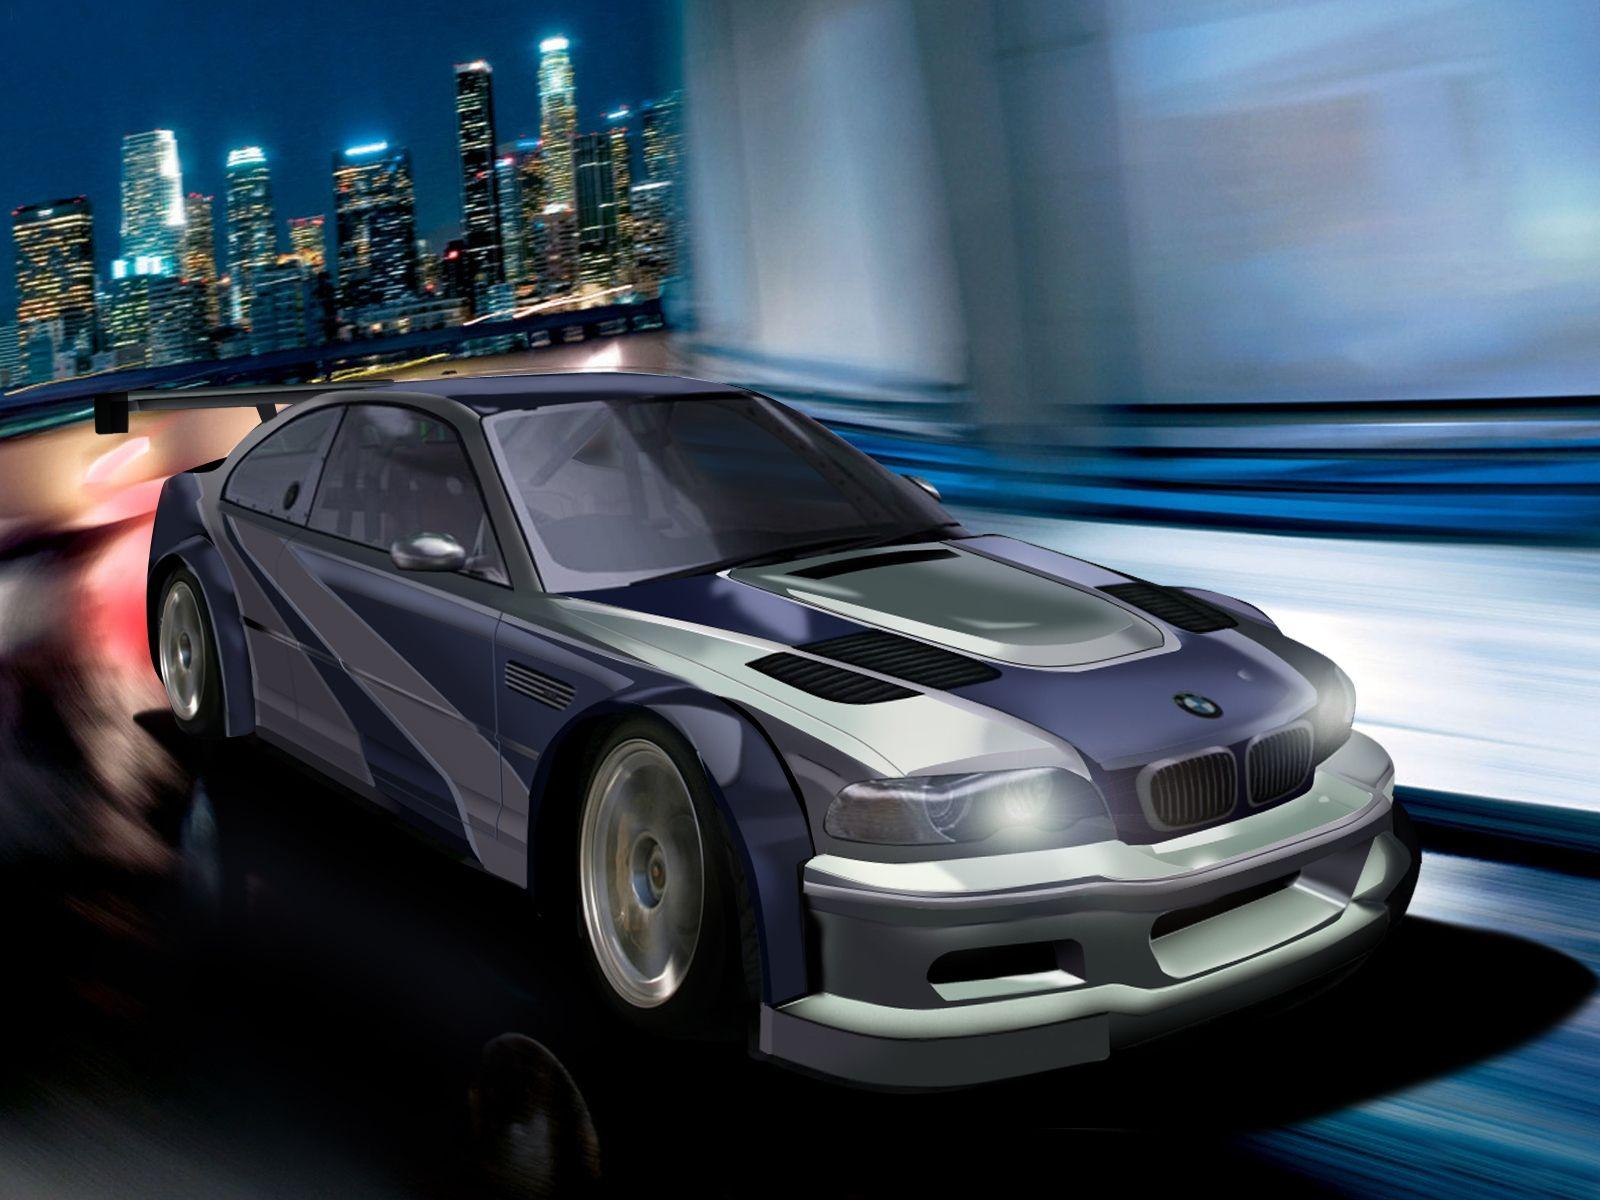 Best Most Wanted Wallpaper HD Image Need For Speed On Mobile